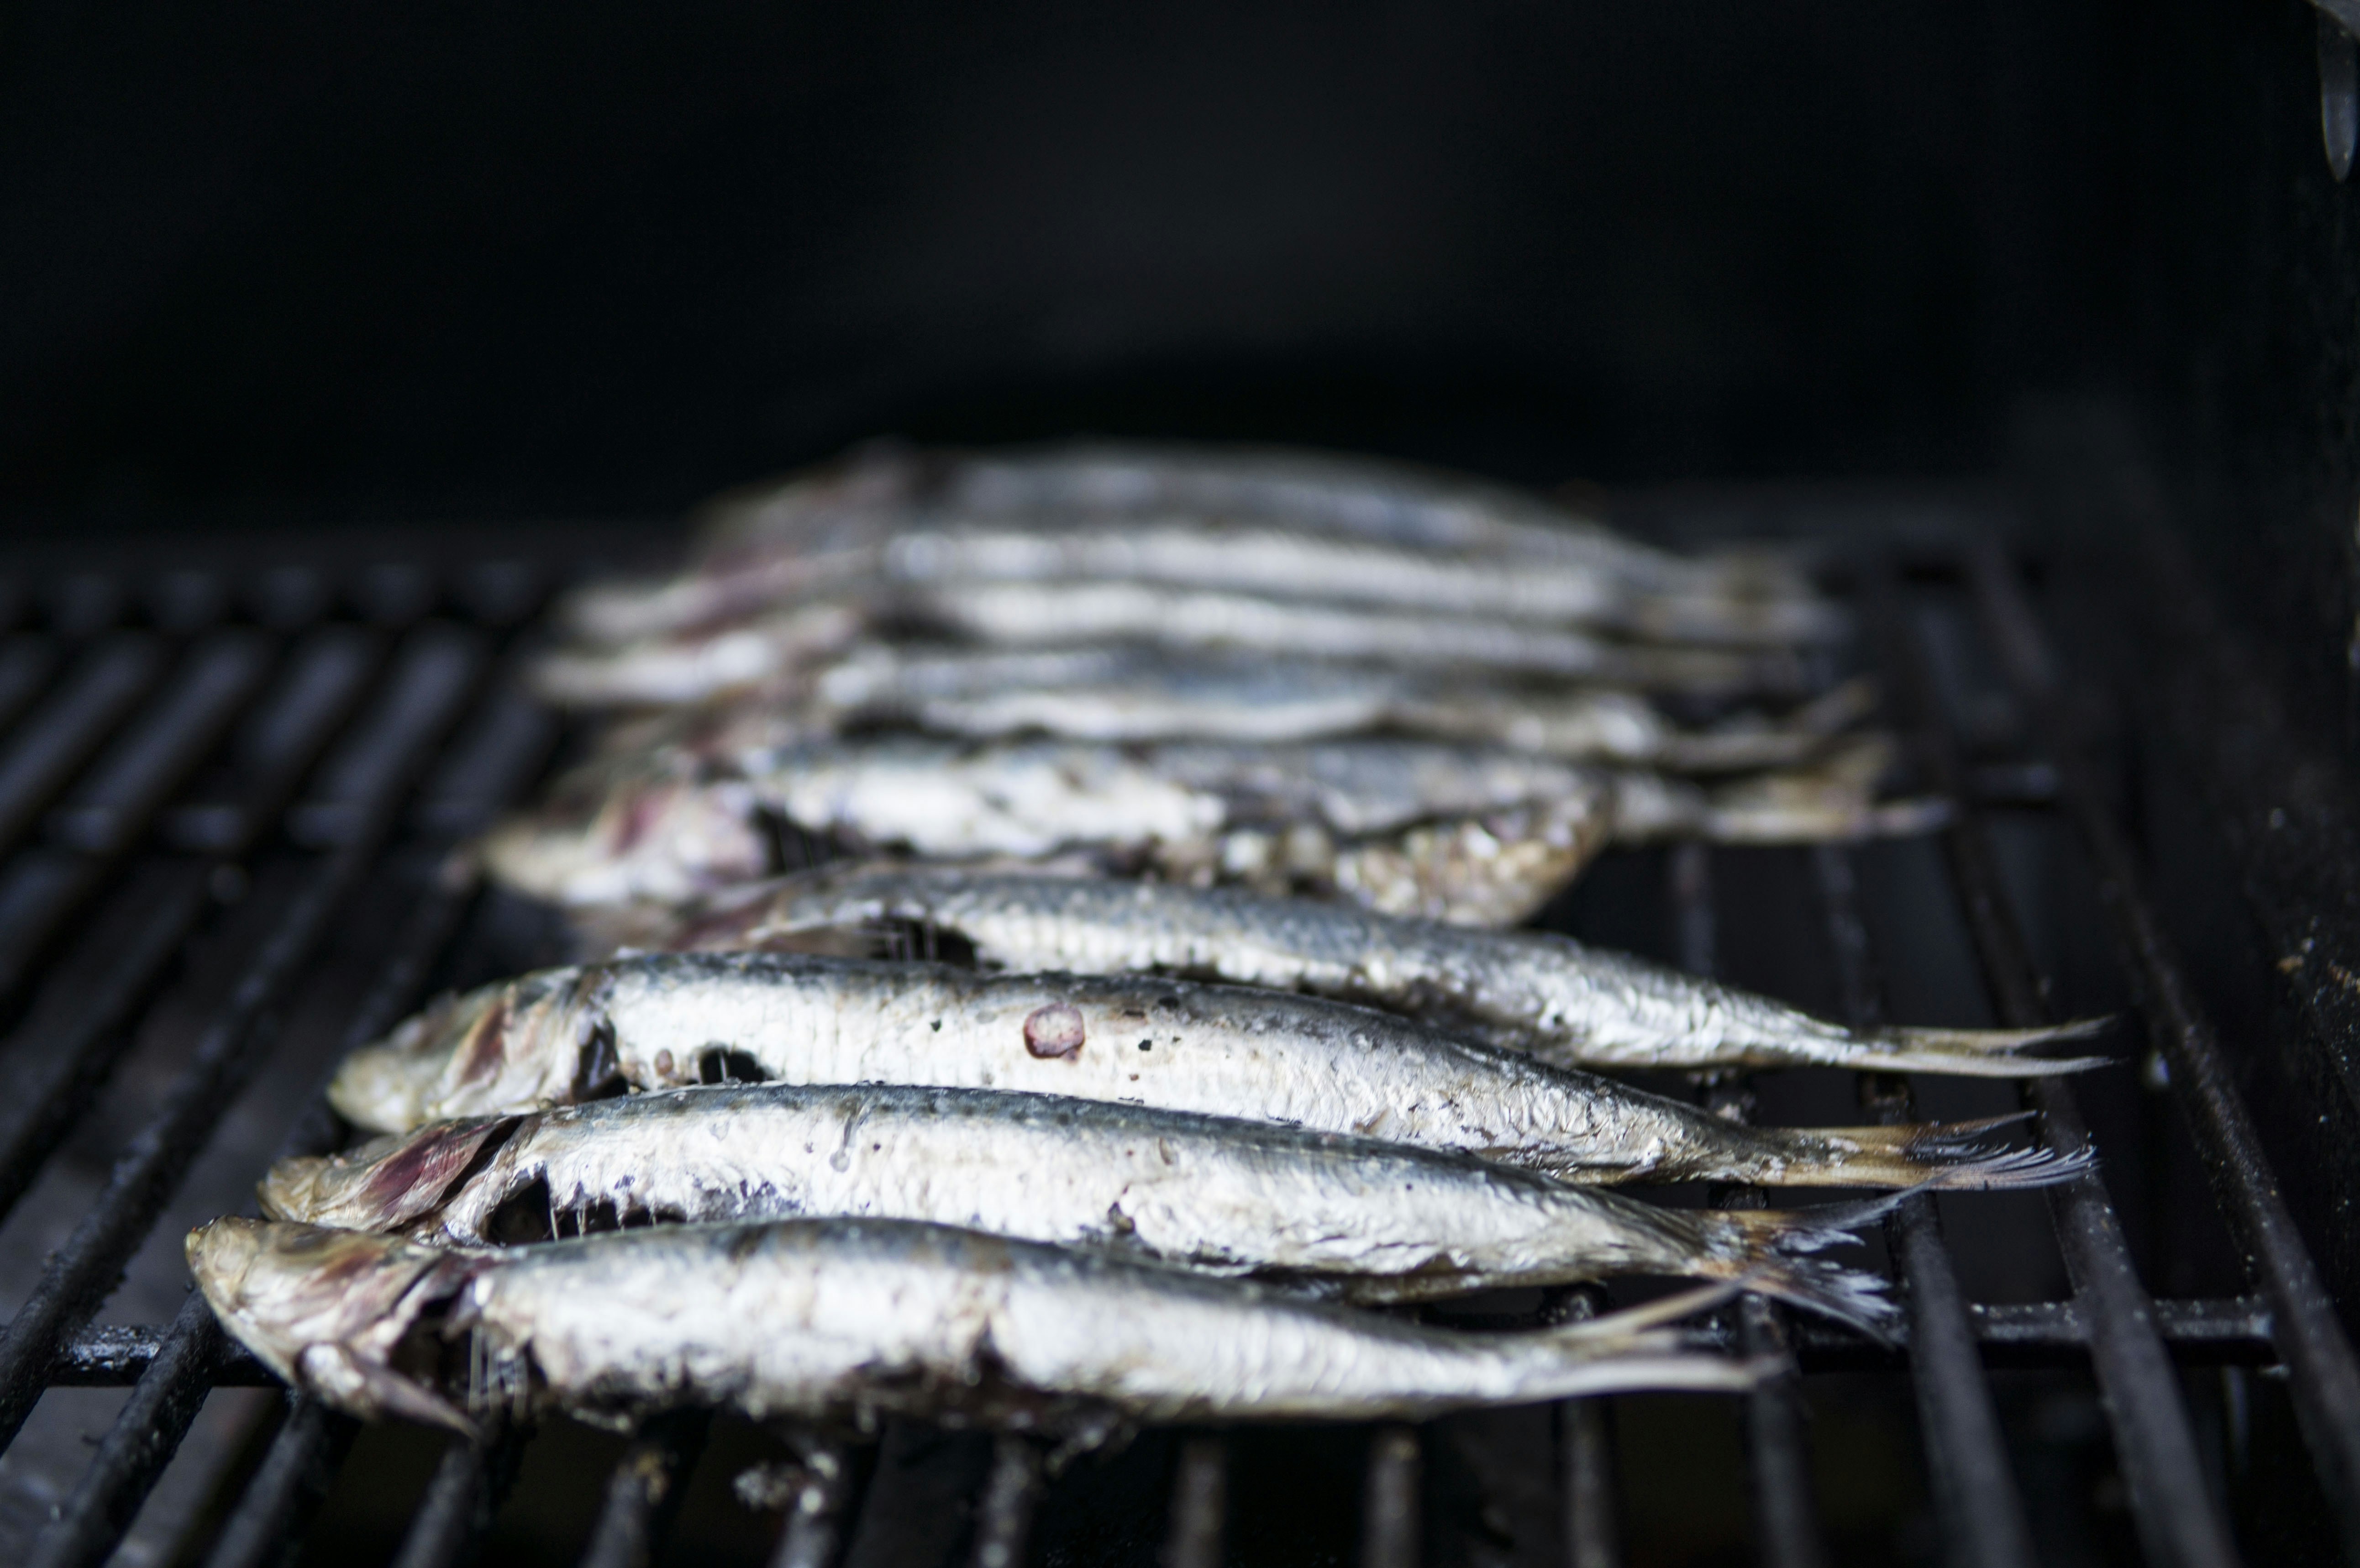 Grilling sardines for lunch with friends